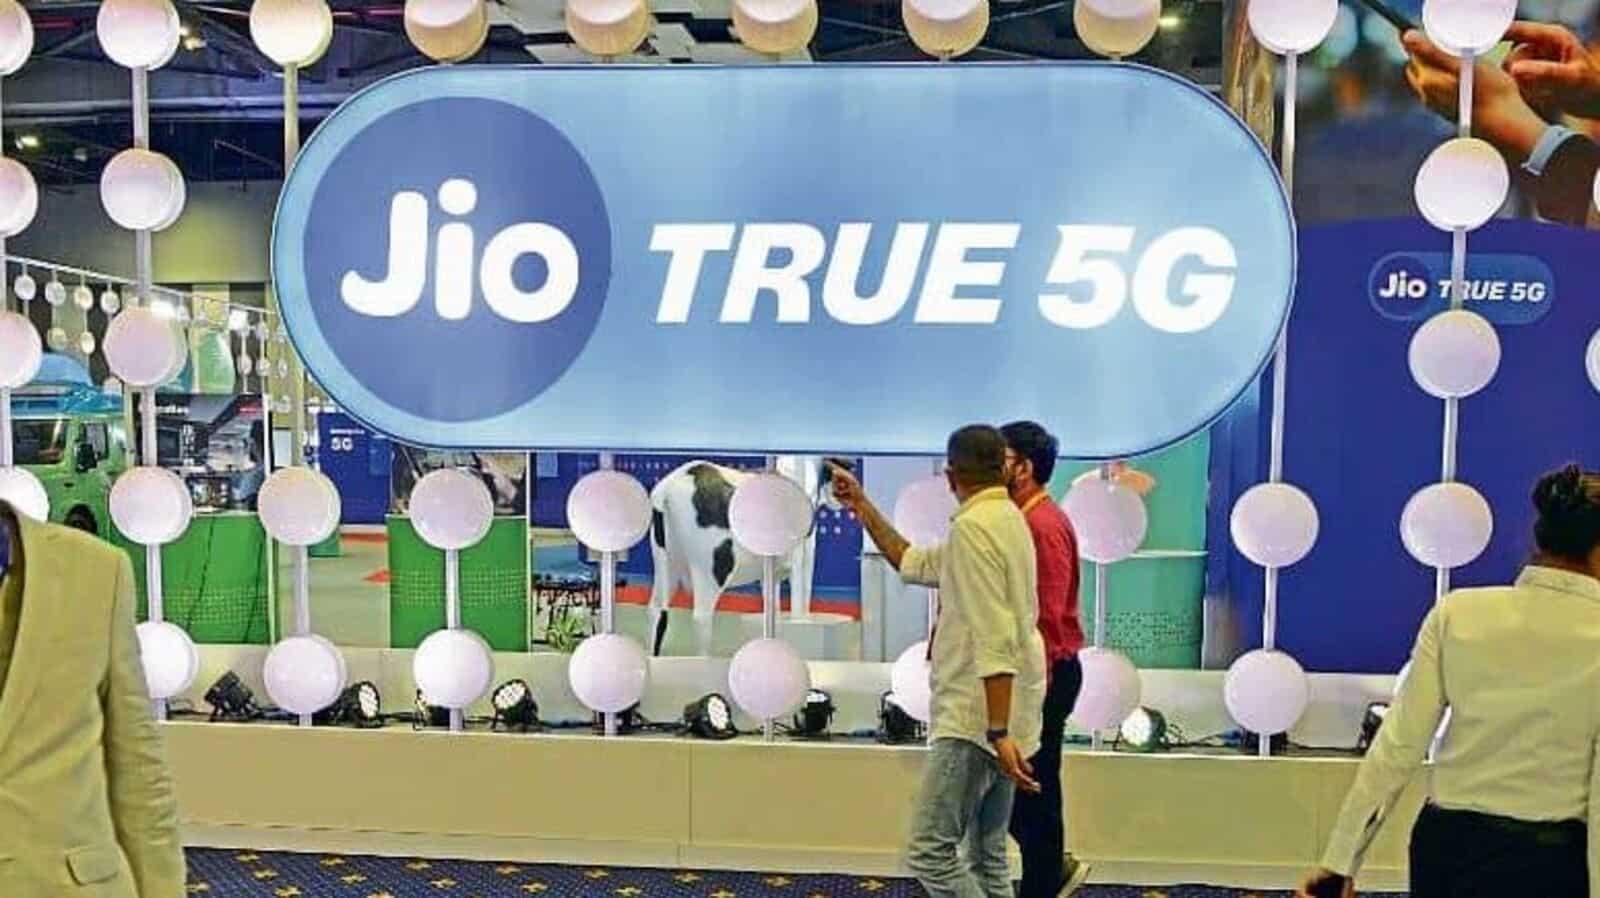 Beta trial of Reliance Jio’s 5G service to begin in these 4 cities from tomorrow